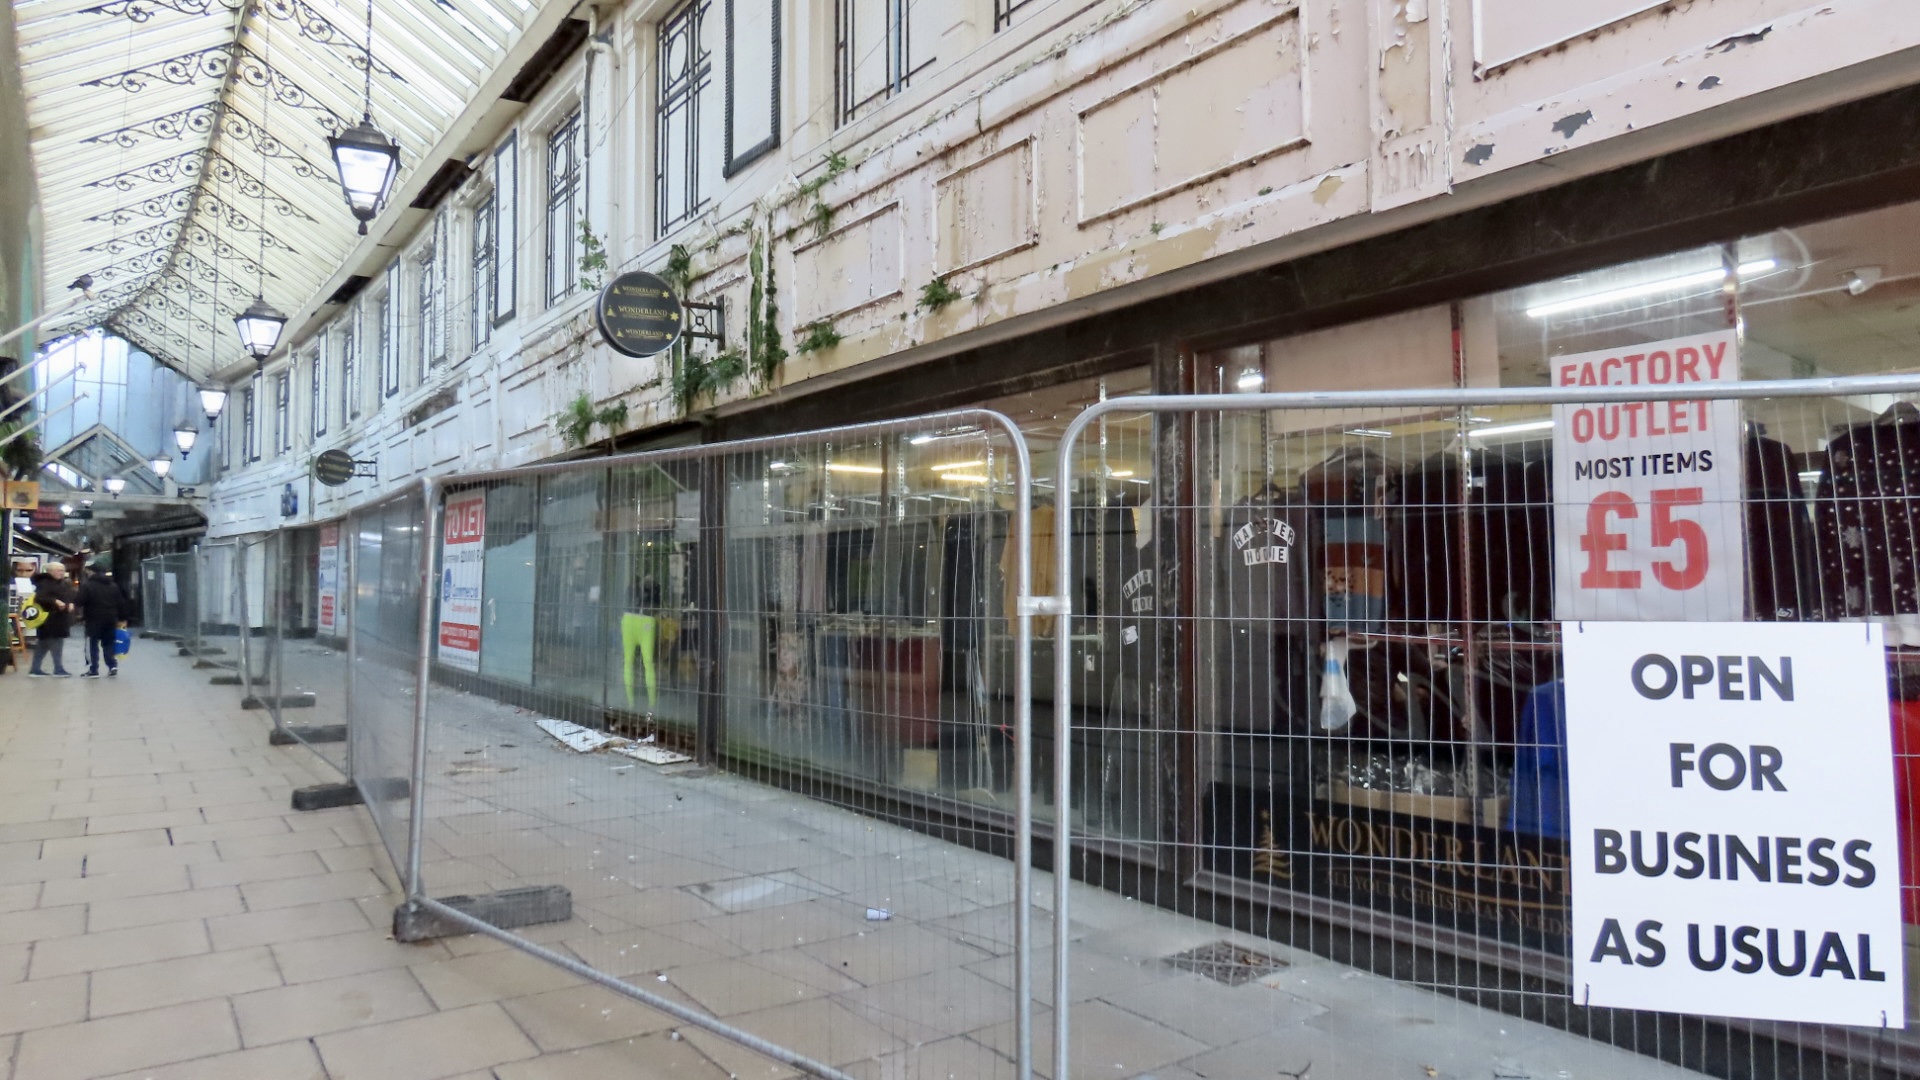 The former BHS building and Cambridge Arcade in Southport. Photo by Andrew Brown Media